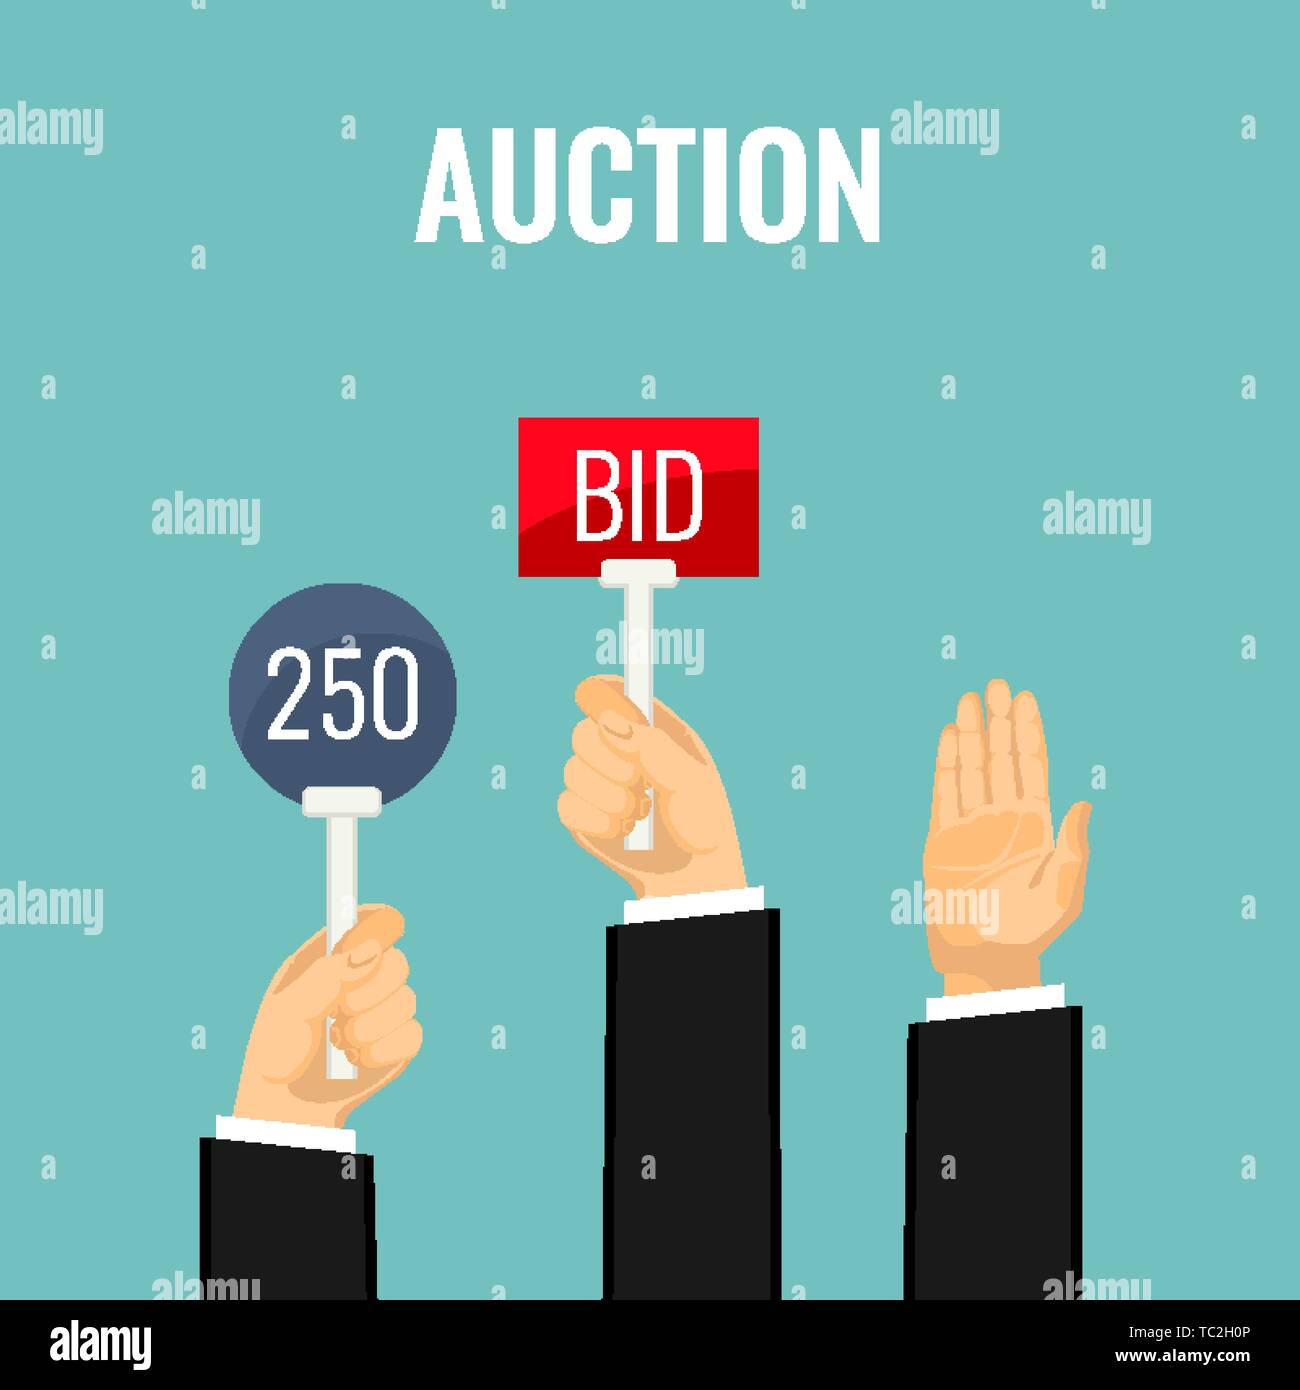 Auction meeting and hands holding paddles with number and BID inscriptions. Vector illustration of buying things on auction by rising special paddle a Stock Vector